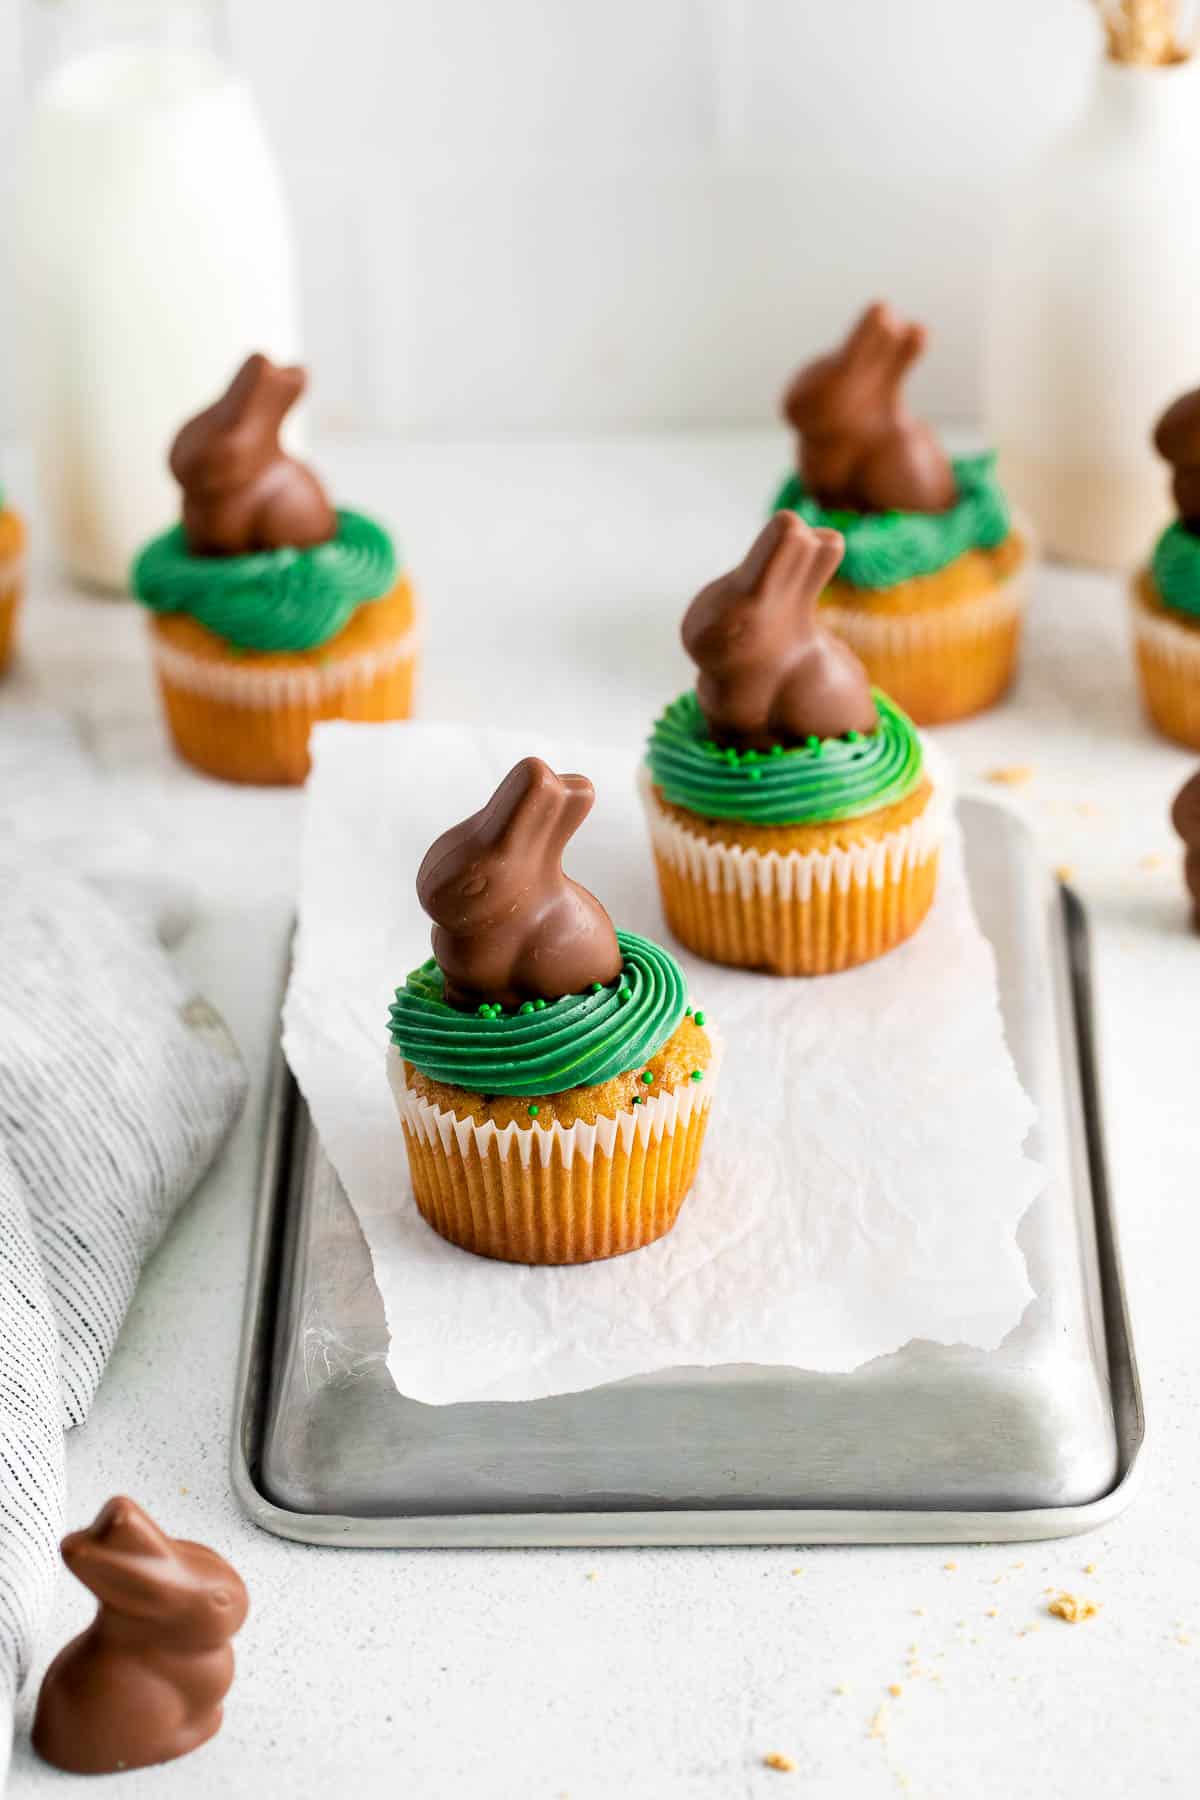 carrot cake cupcakes with chocolate bunnies from above